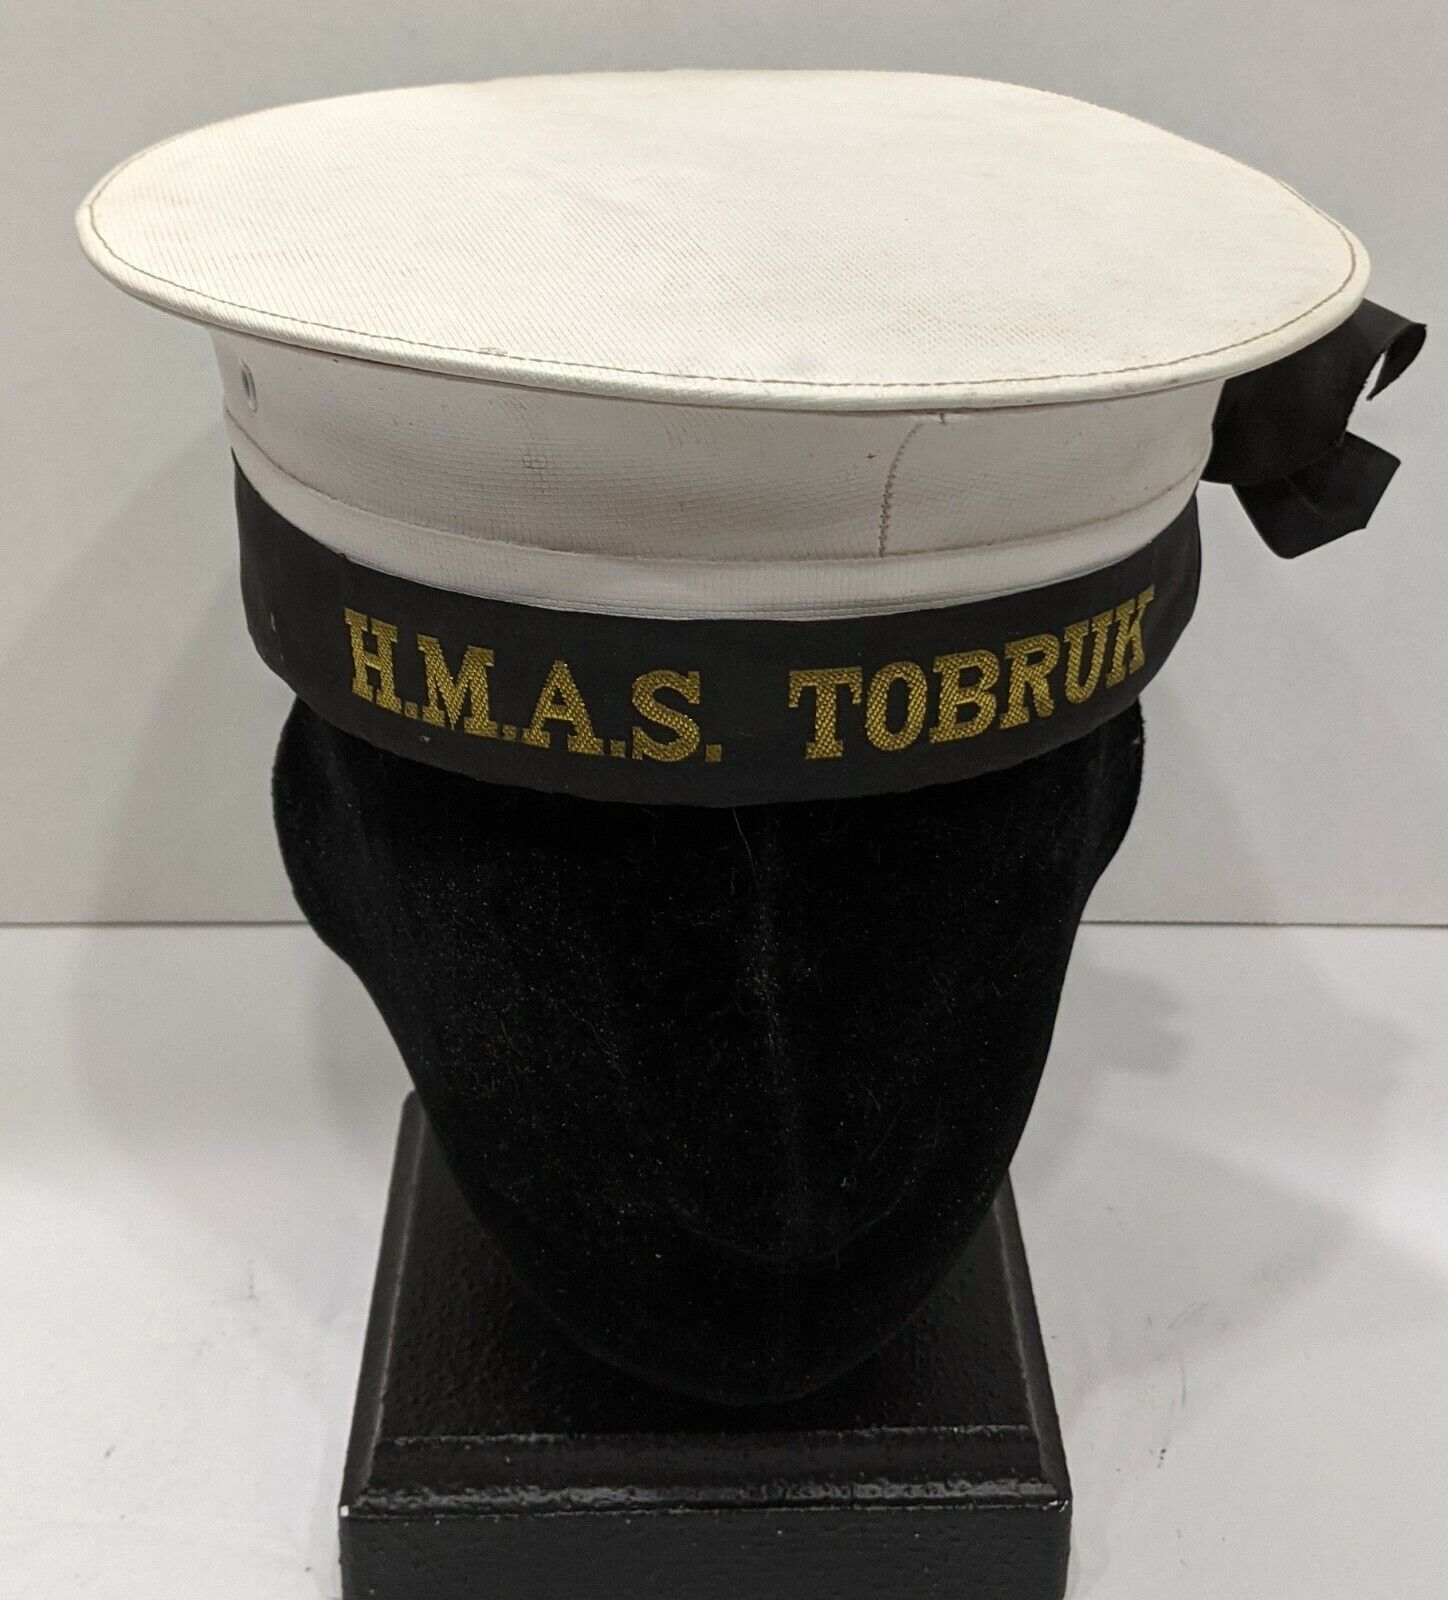 Original Australian Military 1992-1996 hat from the H.M.A.S. from the Tobruk